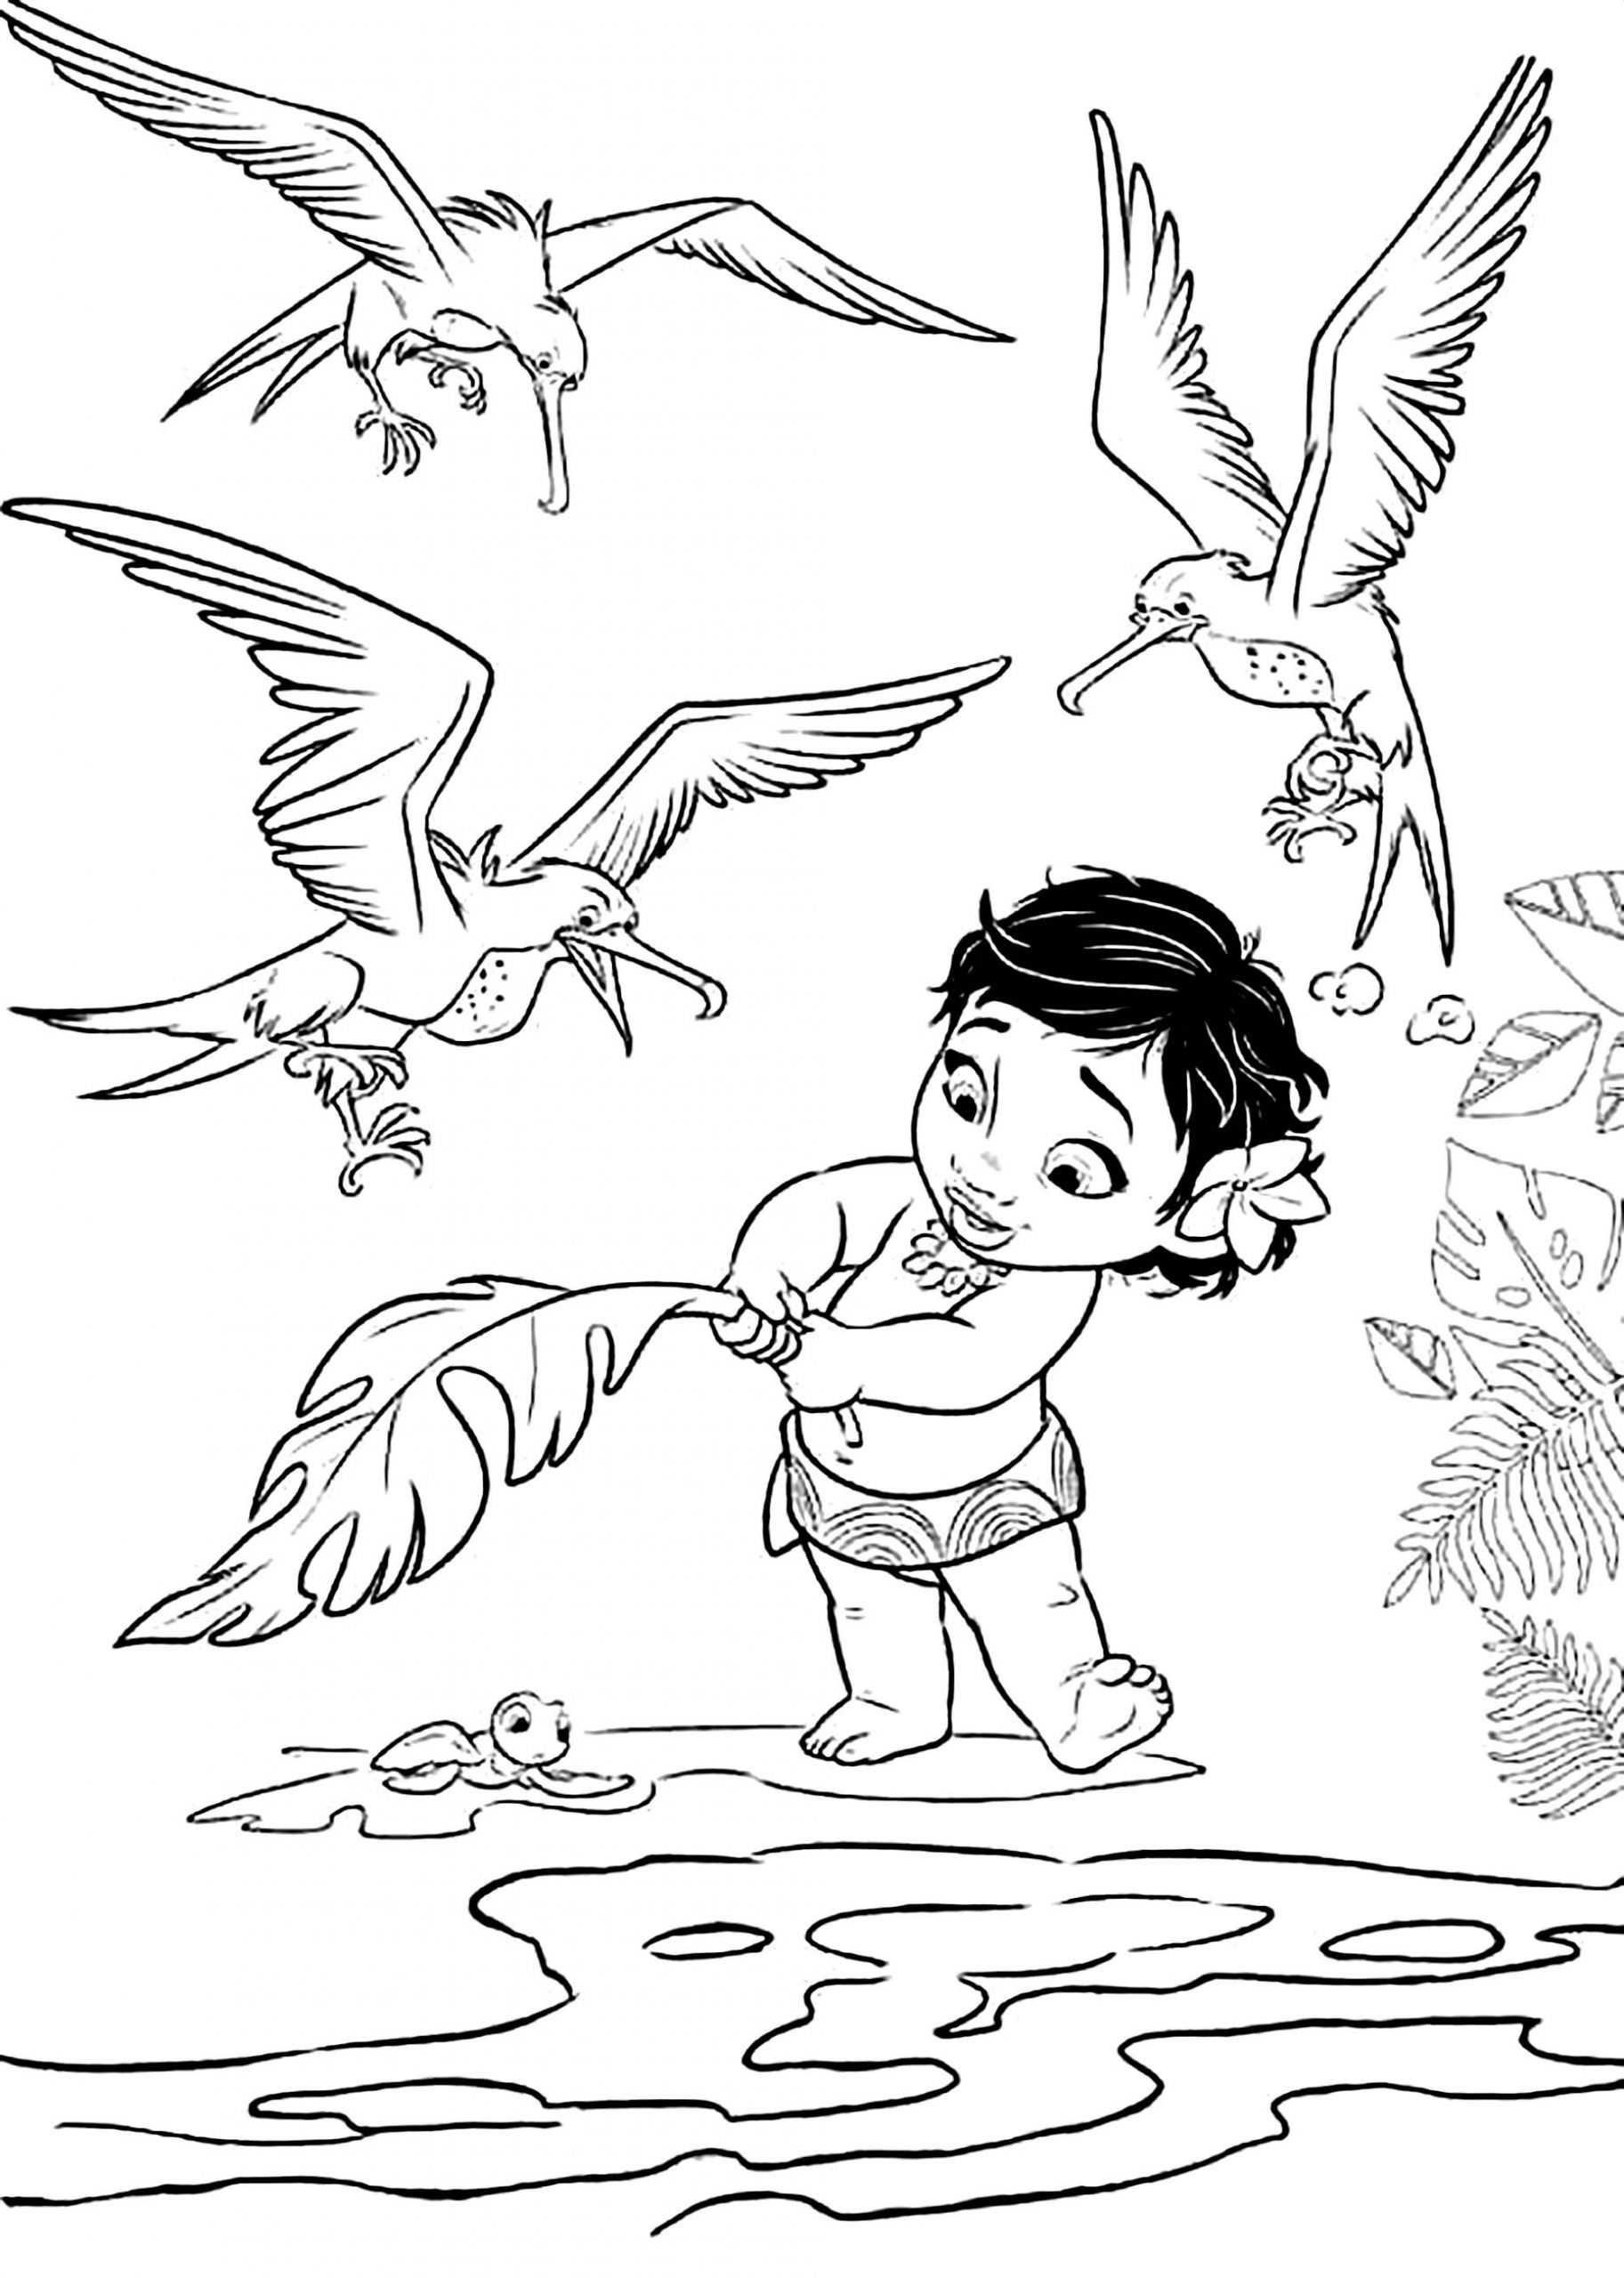 Coloring Pages For Kids Moana
 Moana for children Moana Kids Coloring Pages